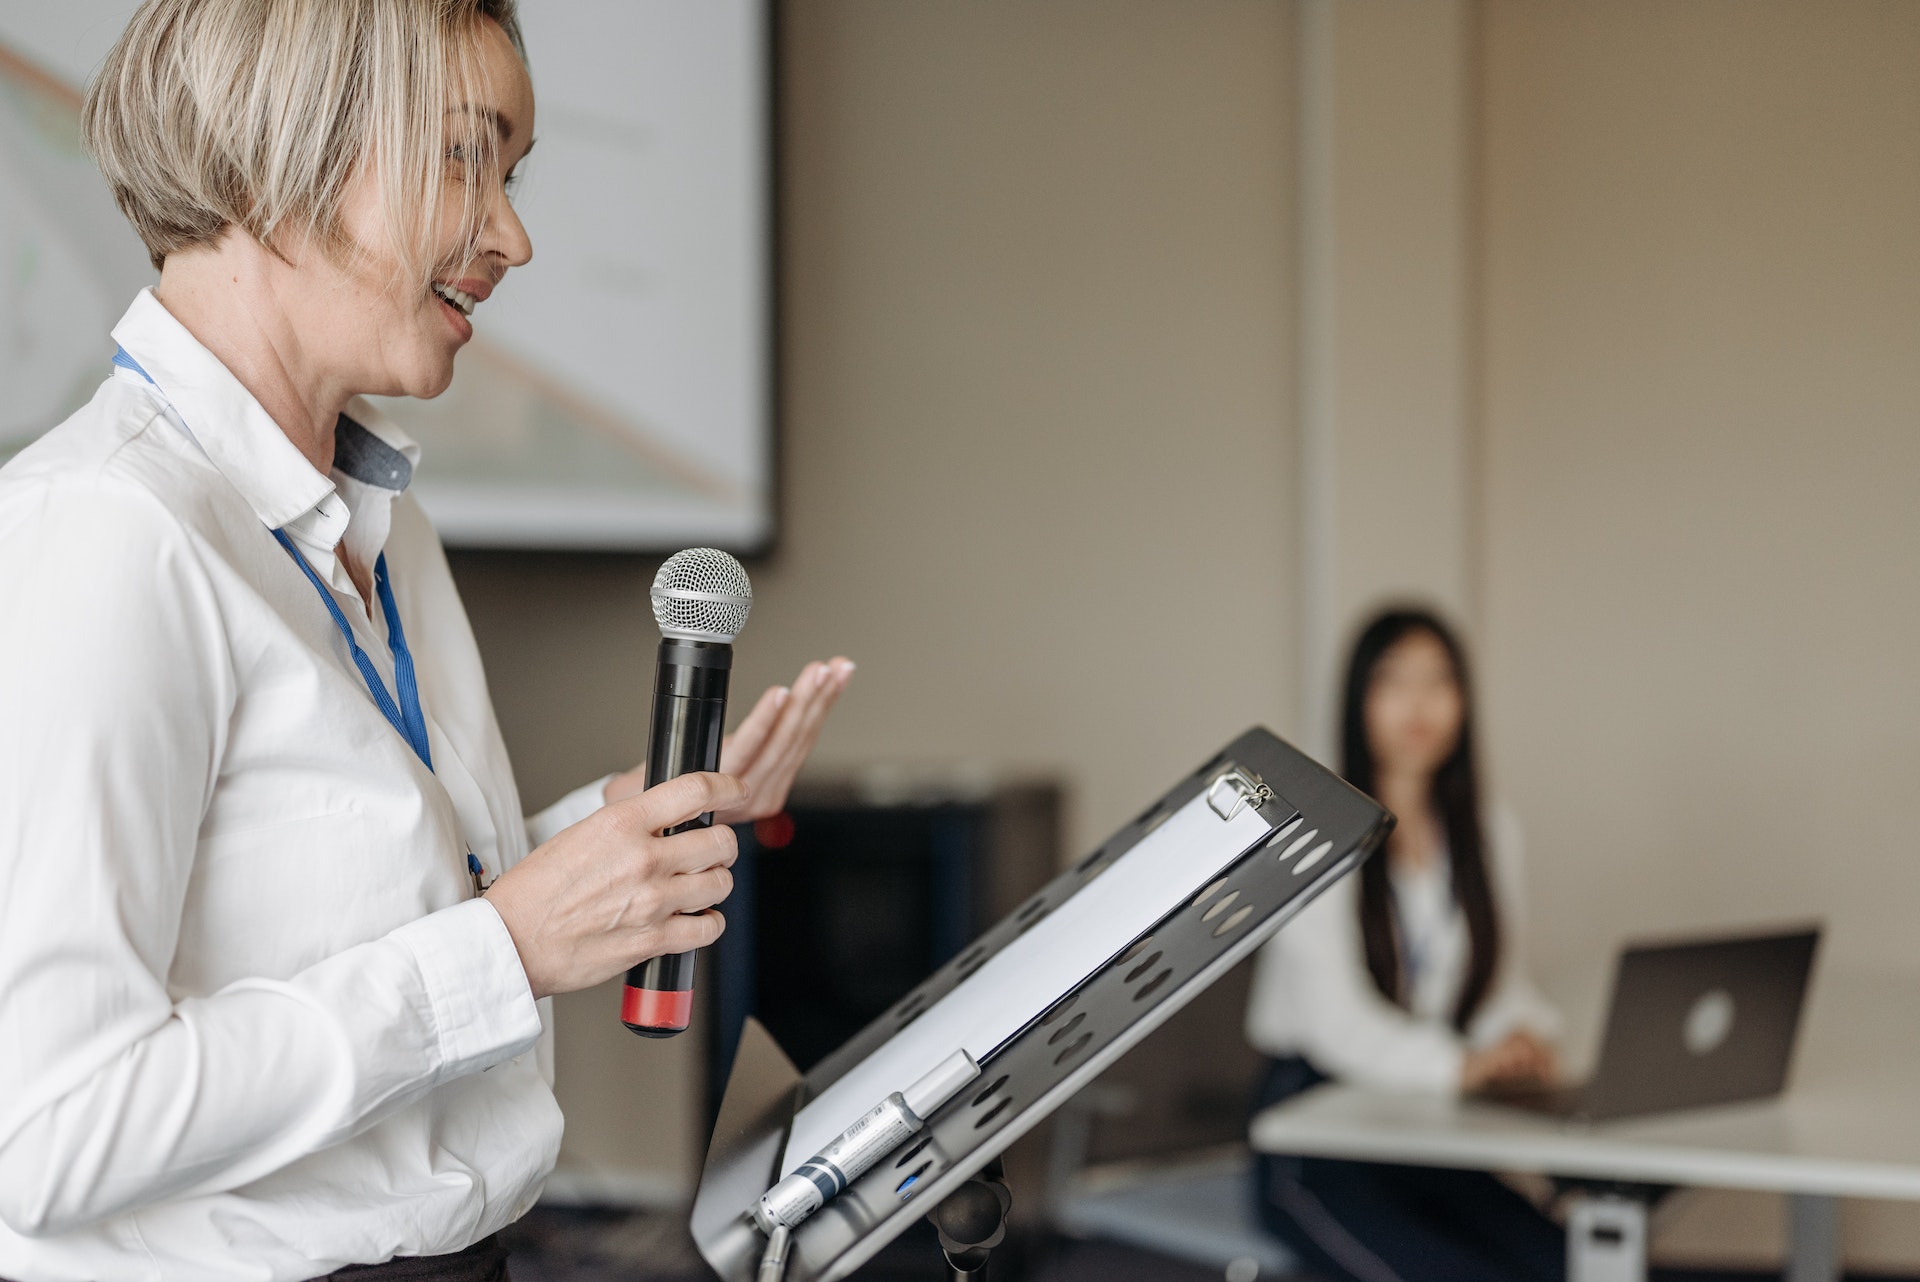 Research conferences: How to become a more confident presenter